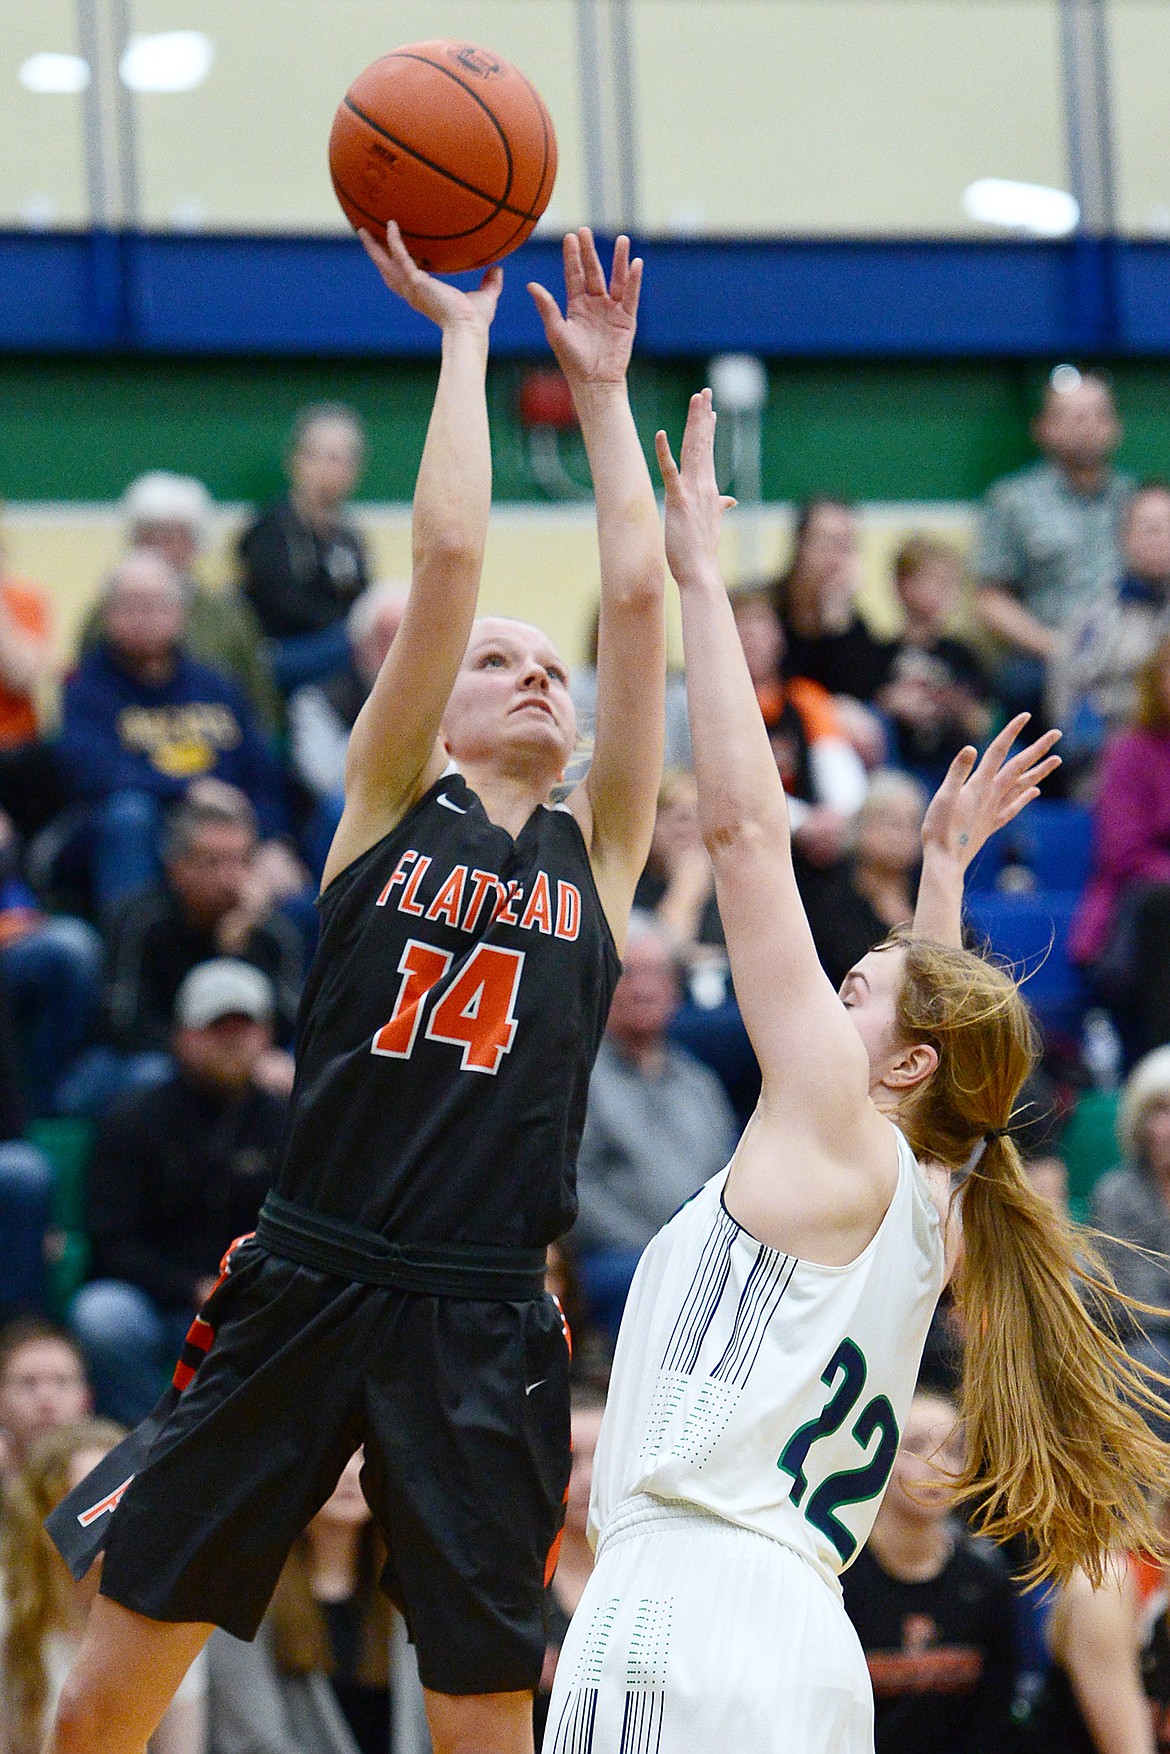 Flathead's Jenna Johnson (14) looks to shoot over Glacier's Ellie Keller (22) during Western AA Divisional play at Glacier High School on Thursday. (Casey Kreider/Daily Inter Lake)